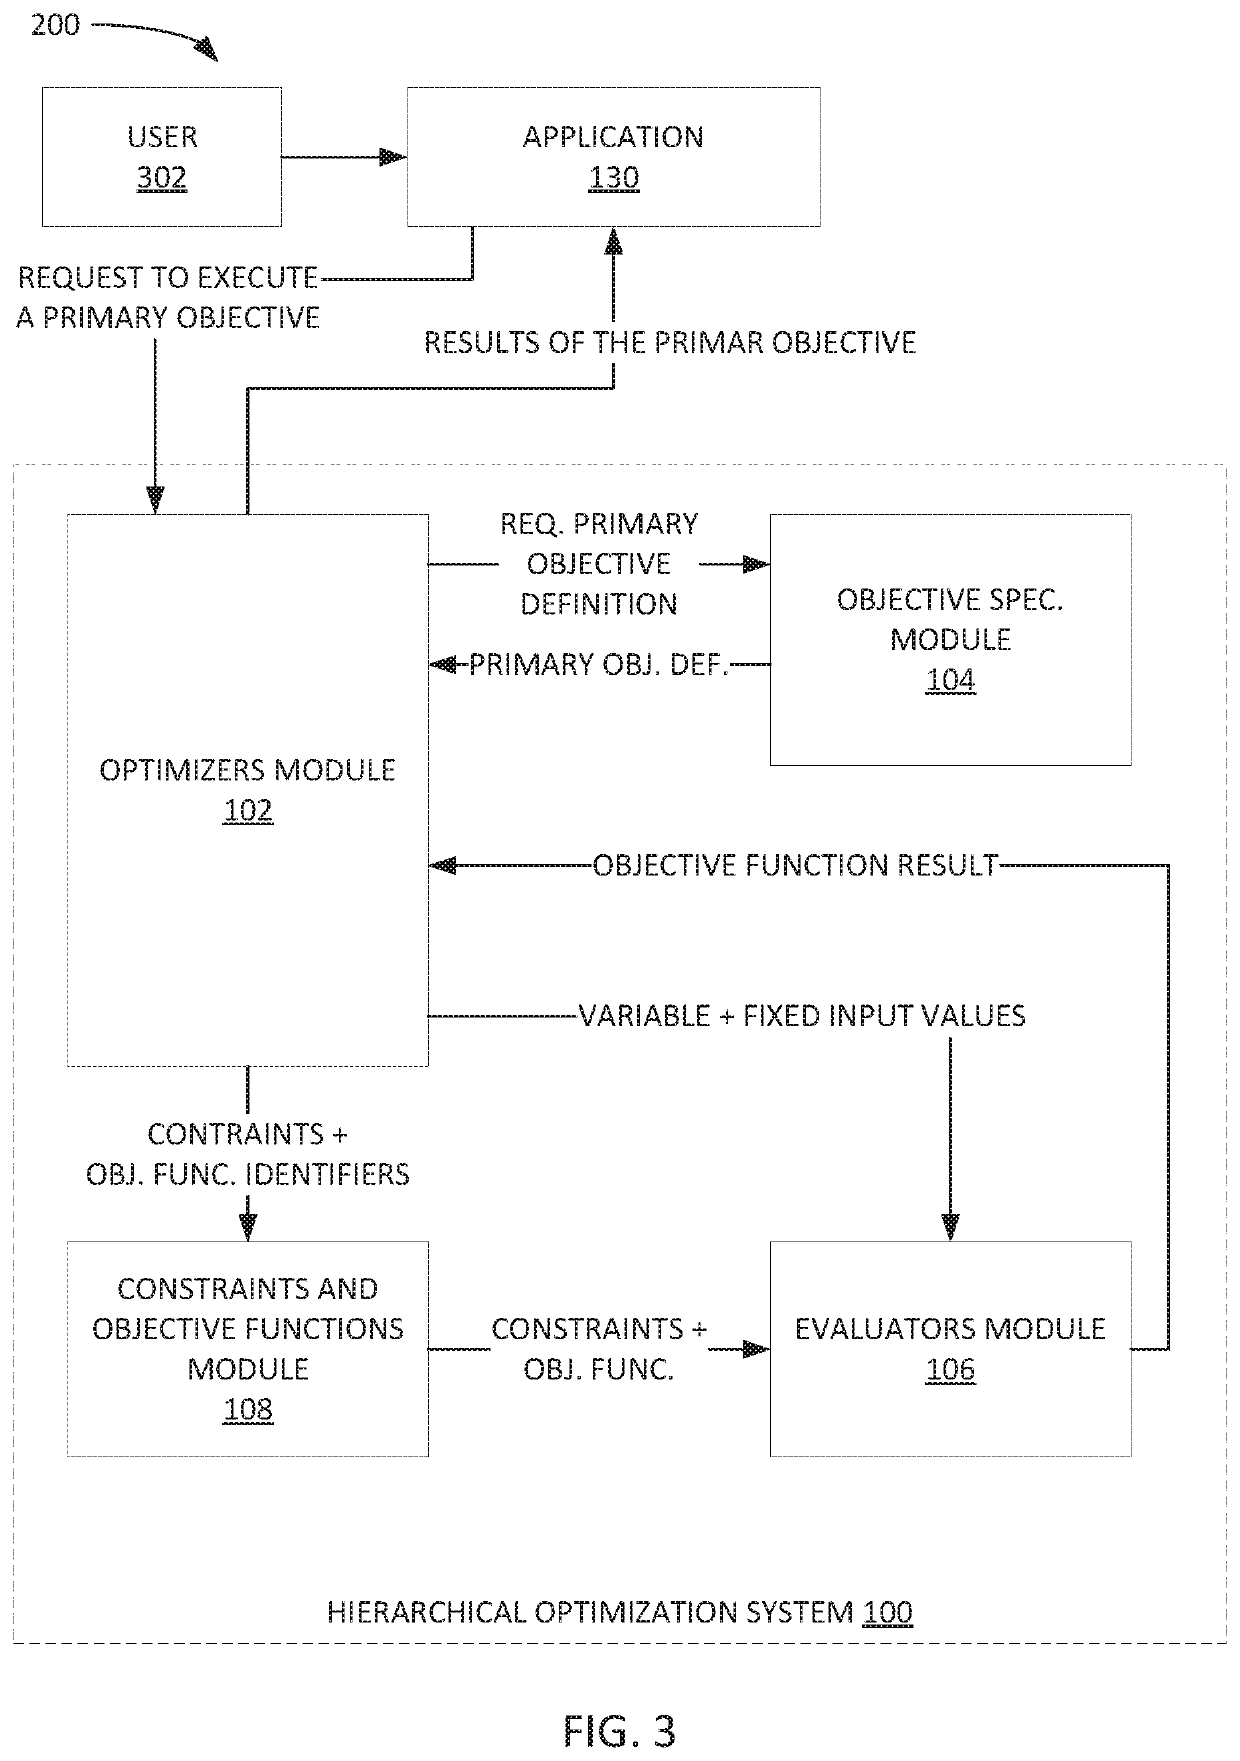 Hierarchical optimization for processing objectives sequentially and/or iteratively